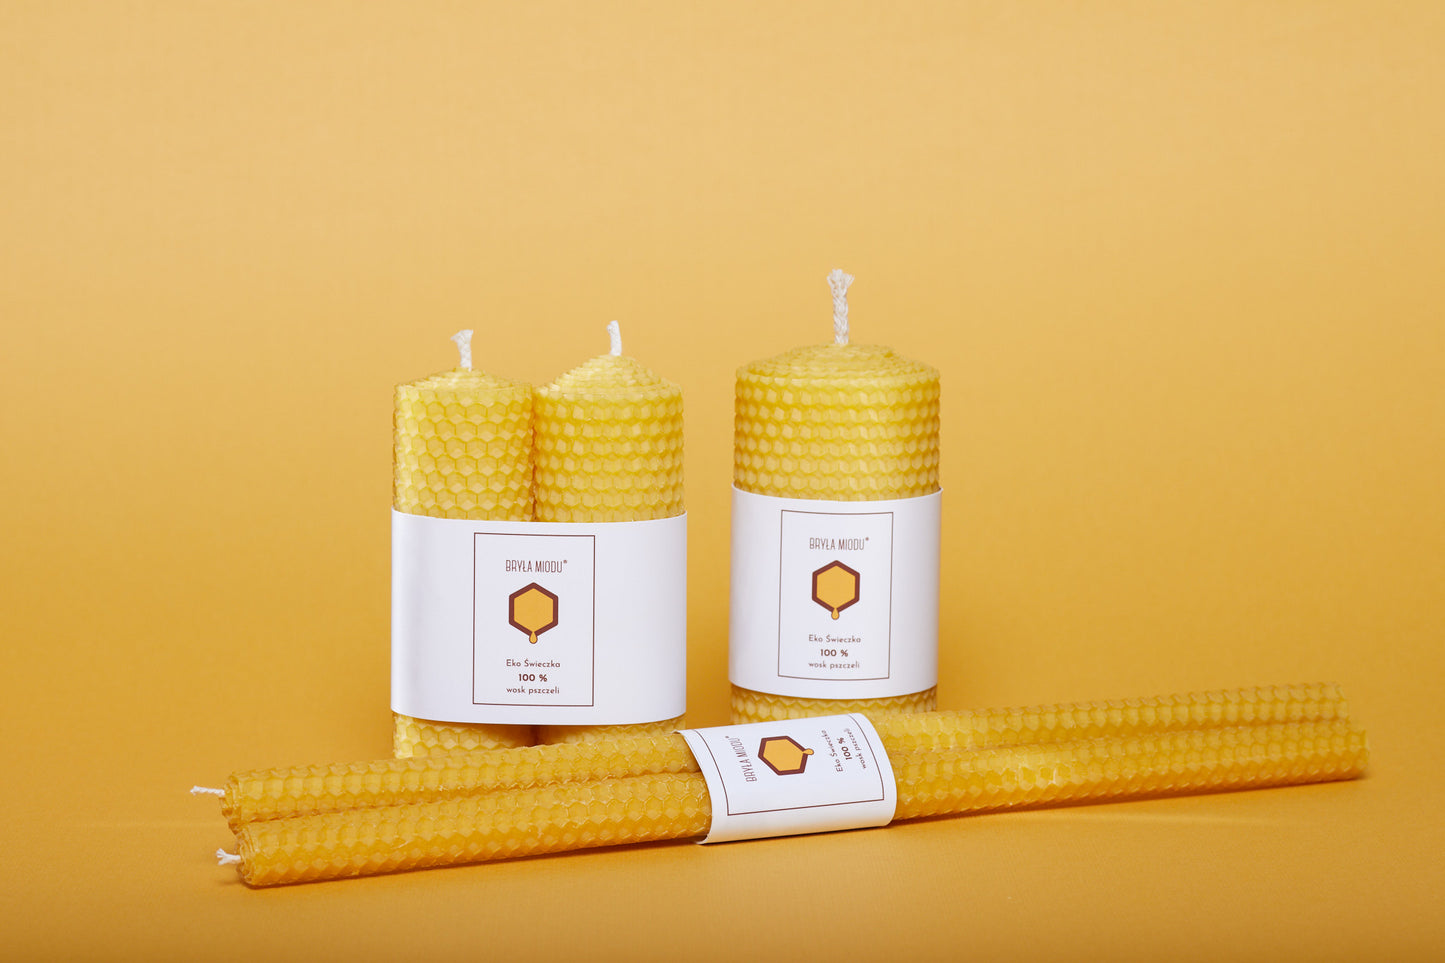 Eco candles made of beeswax - 2 pcs.